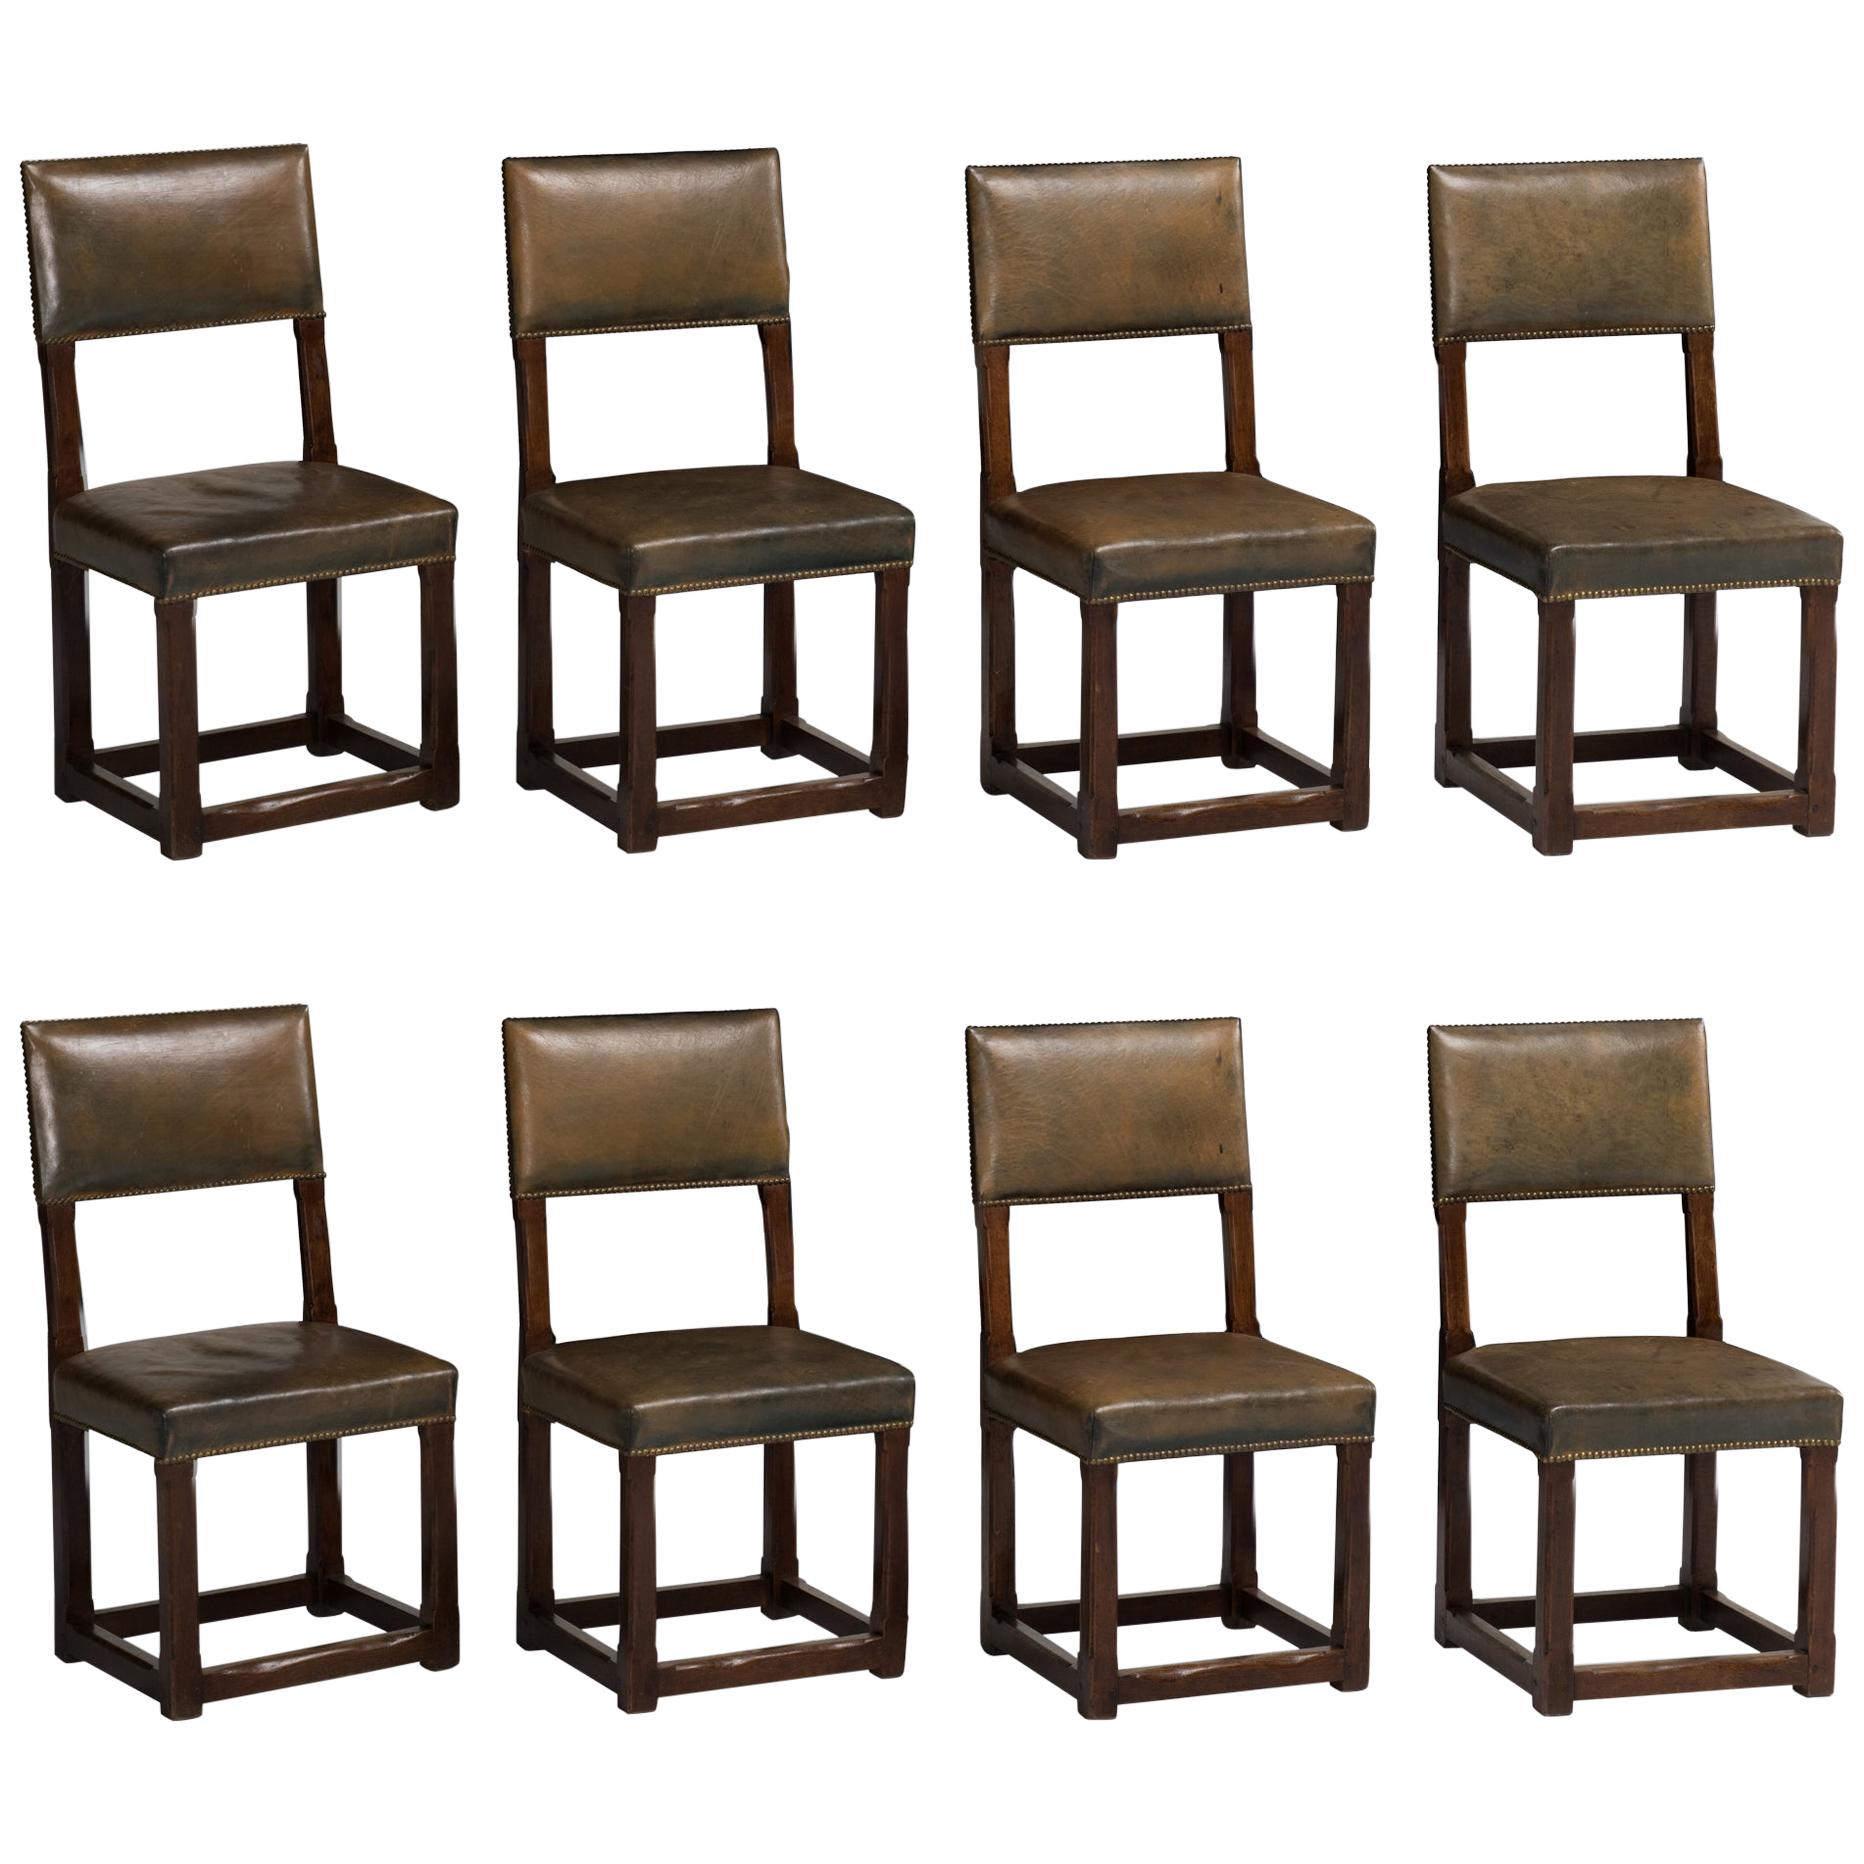 Set of Twelve Gothic Oak and Leather Dining Chairs, England circa 1880